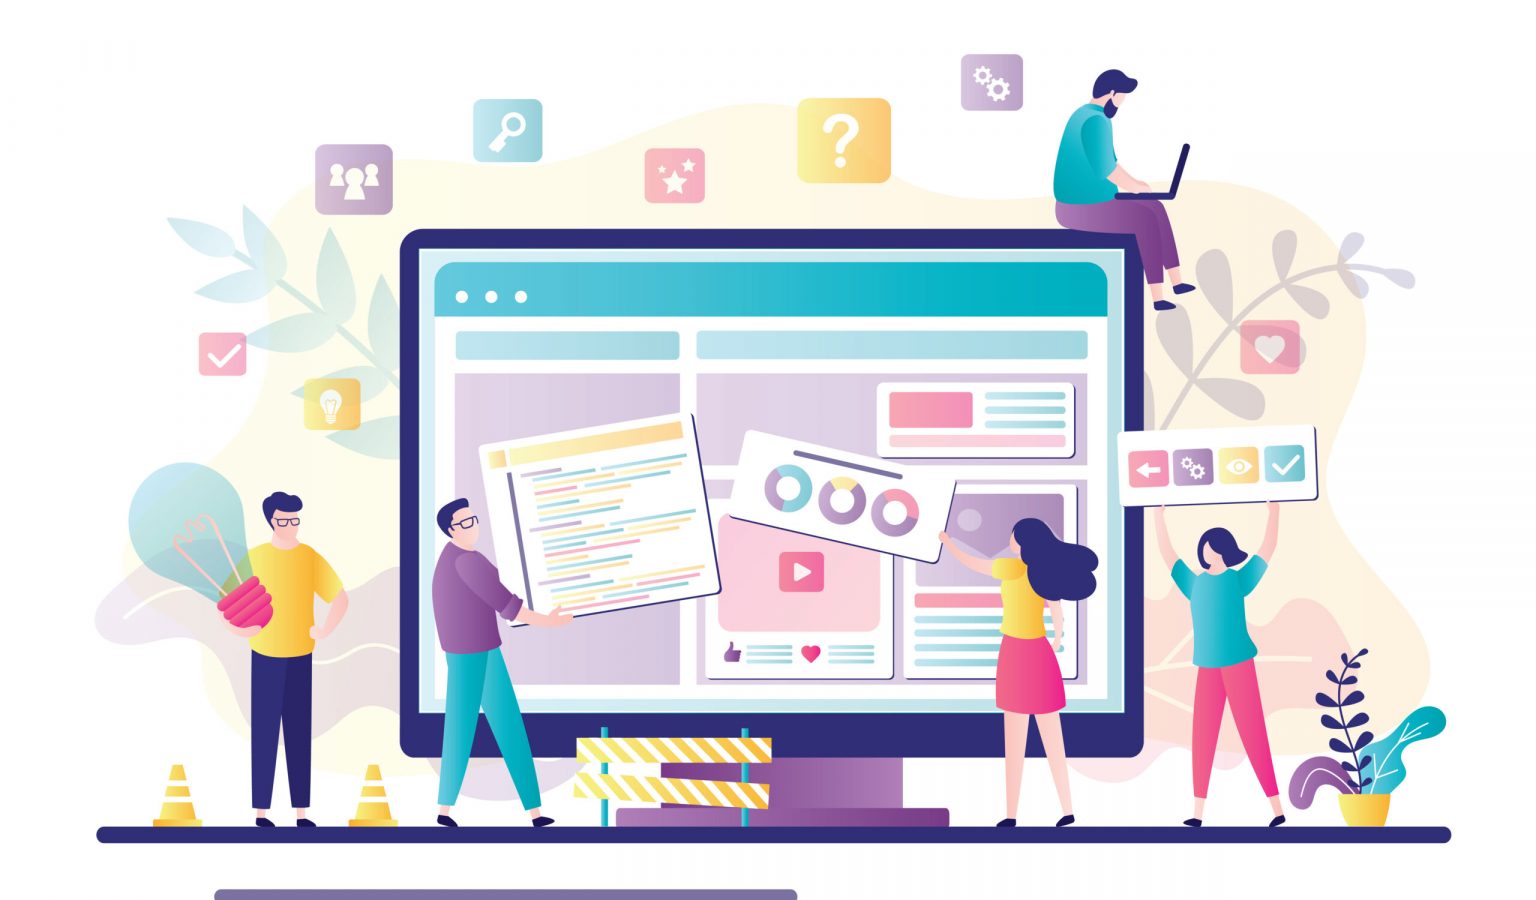 Business team working together on web page design. People building website interface on computer. Web development, teamwork, new internet project. Characters in trendy style. Flat vector illustration